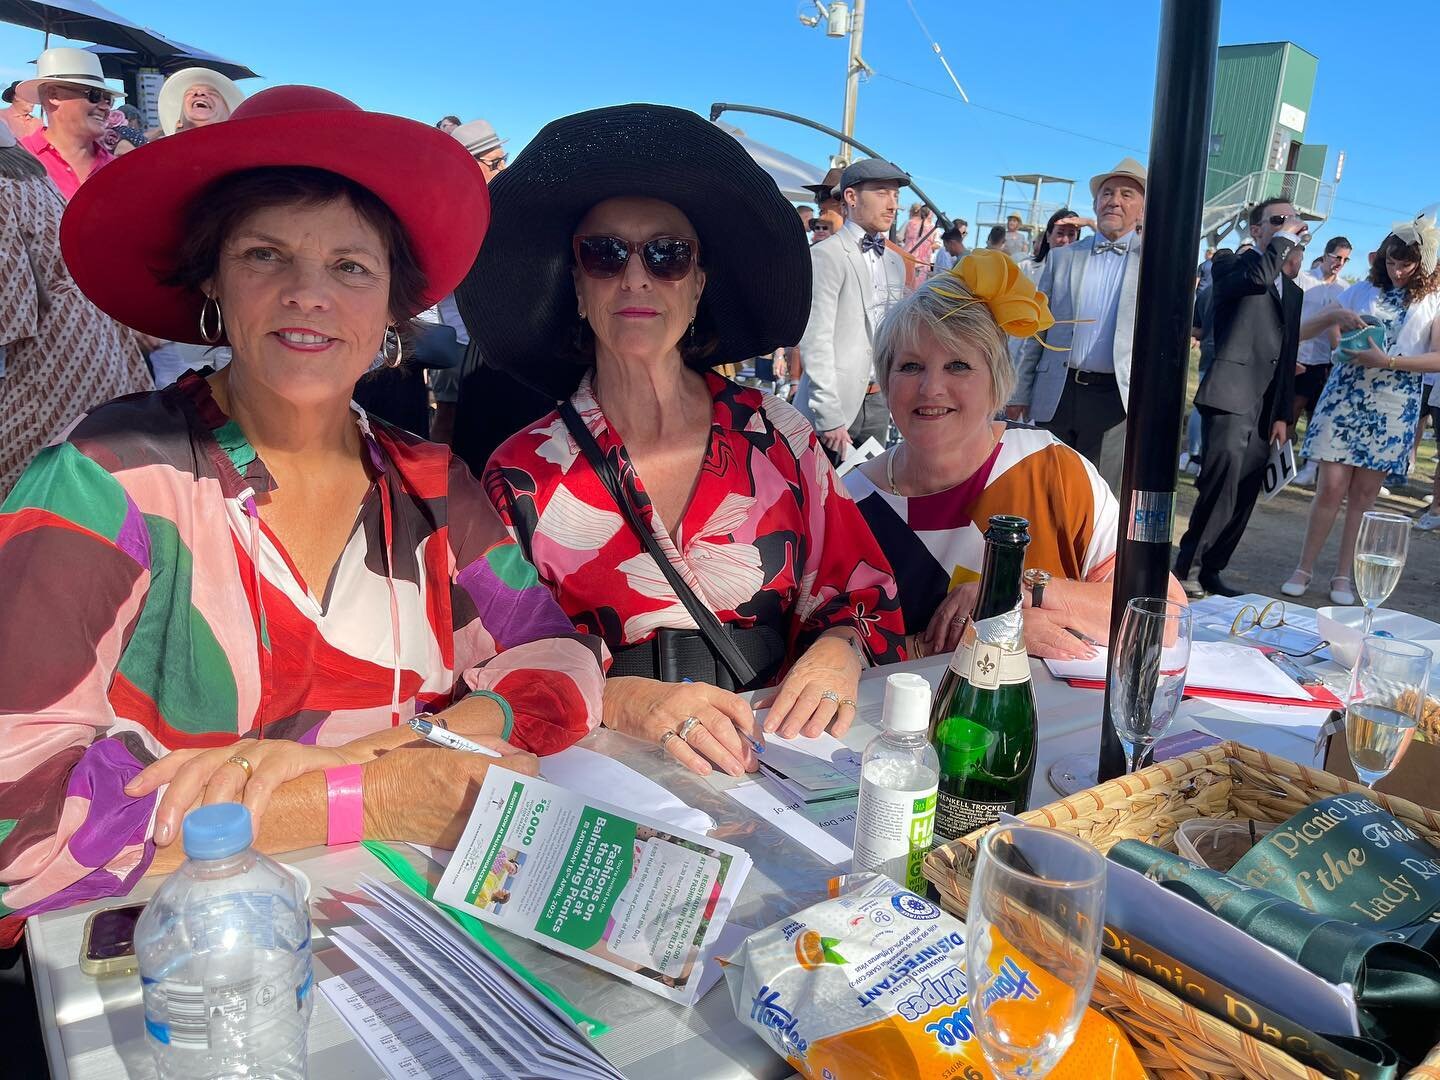 Fab day judging Fashion on the Field 

Many thanks to @balnarringraces , such a well run event. 

#fotf #fashiononthefield #picnicraces #countryracingfashion  #millinery #racingmillinery  #racingfashion #racingfashionaustralia #balnarringraces